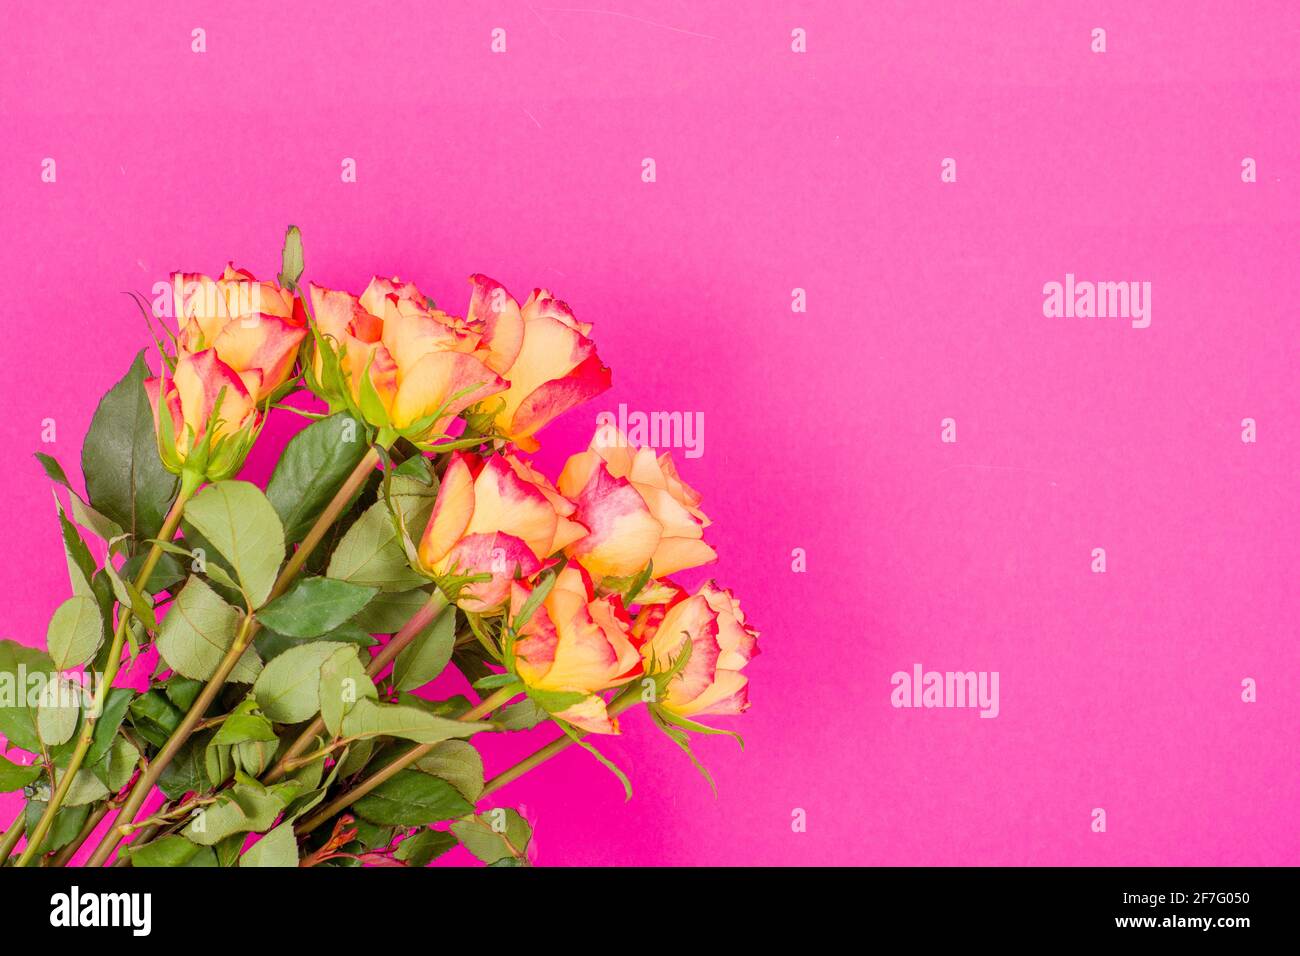 Rose flowers on a colored background High Quality Photo Stock Photo